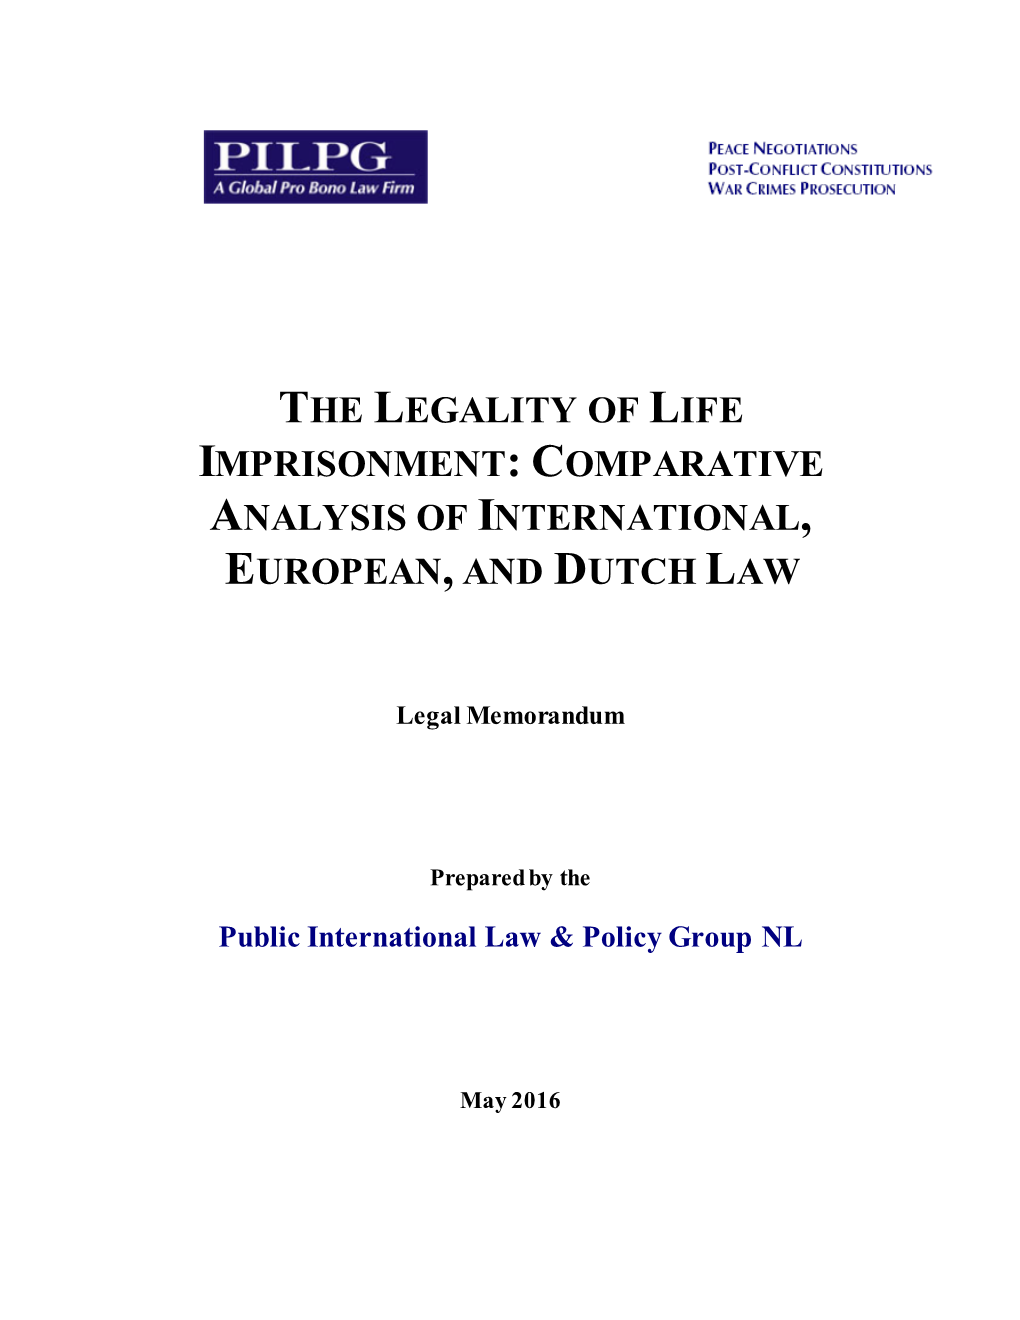 The Legality of Life Imprisonment: Comparative Analysis of International, European, and Dutch Law